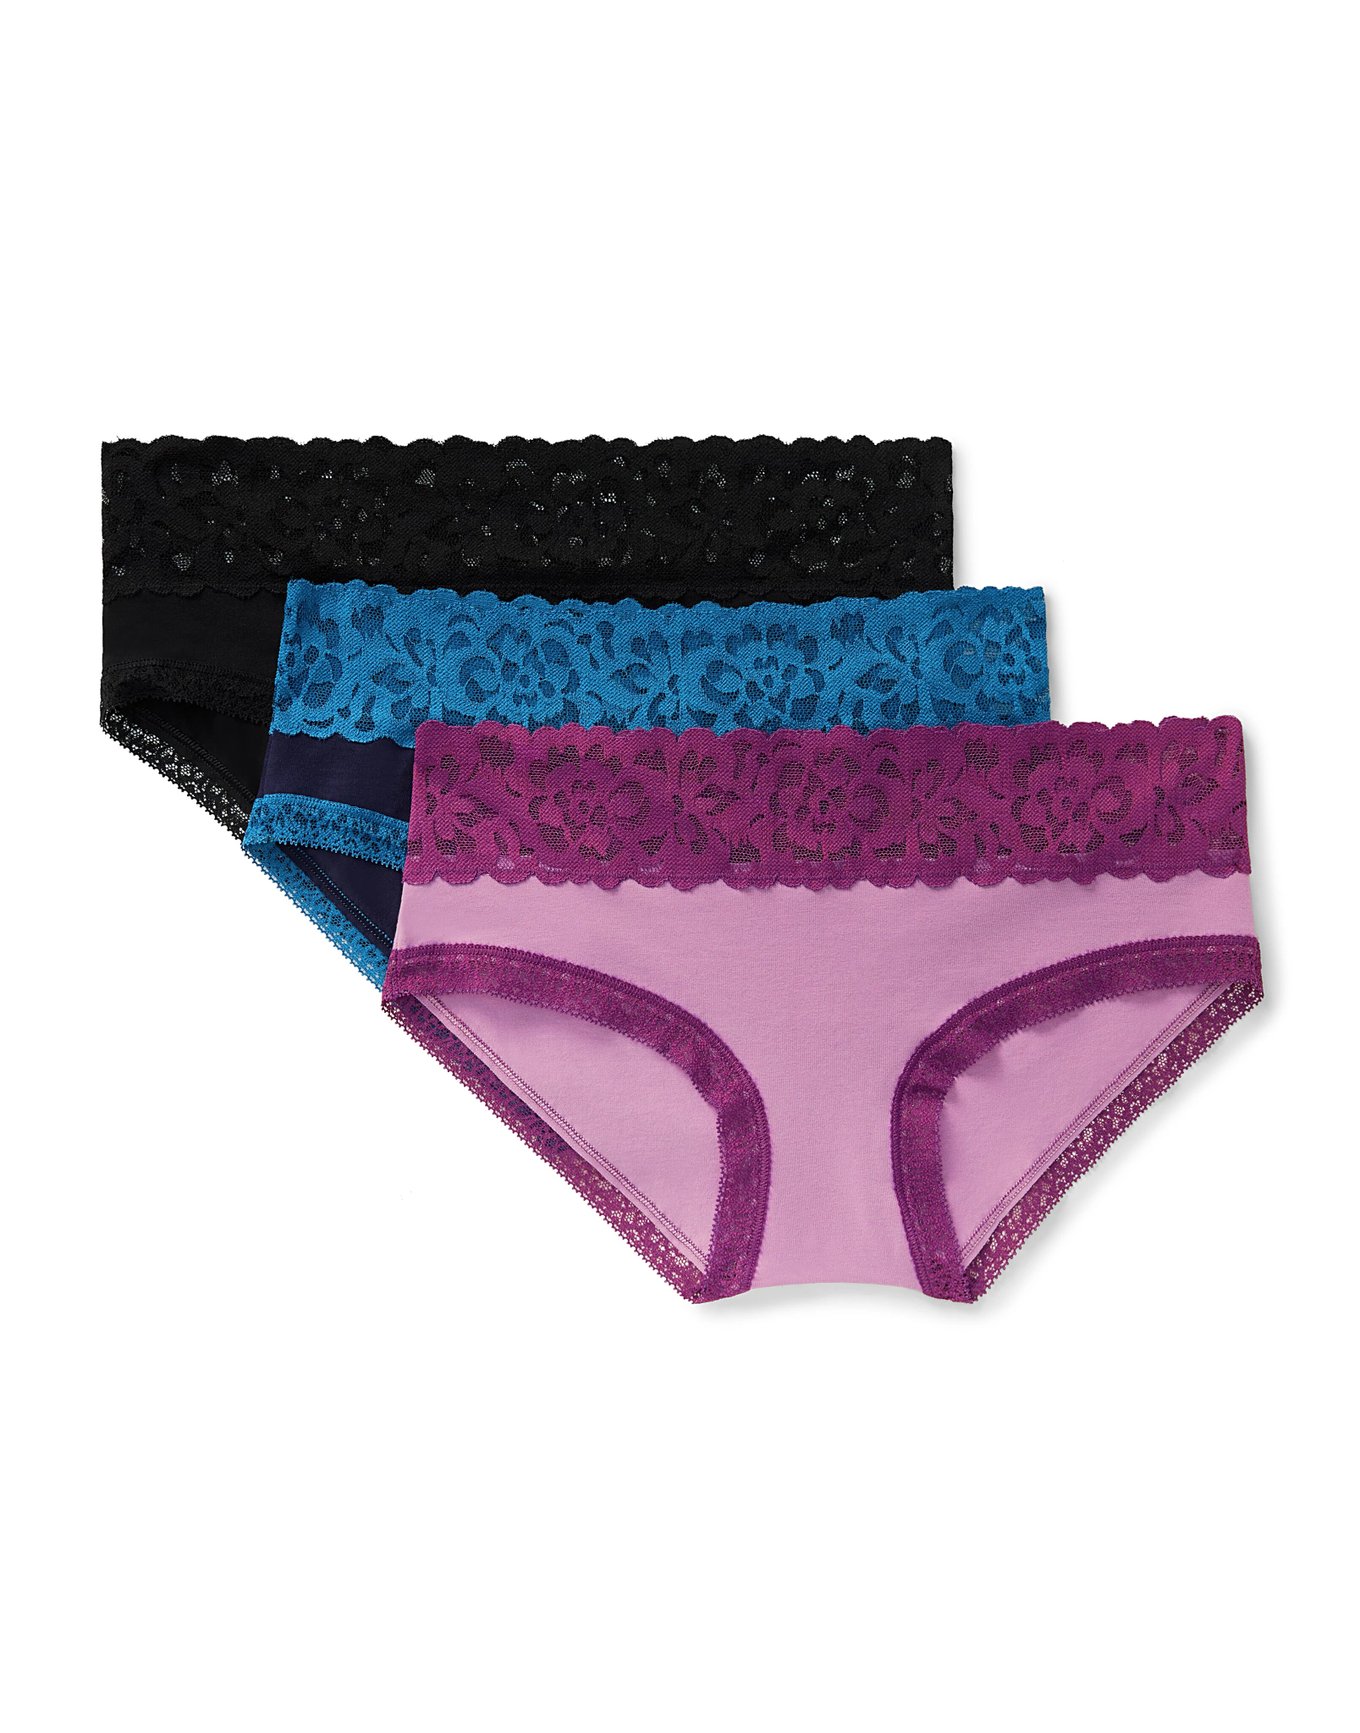 Millie Cotton Pack Hipster Black (Pack of | Me 3), Adore Plus Panties Hipster